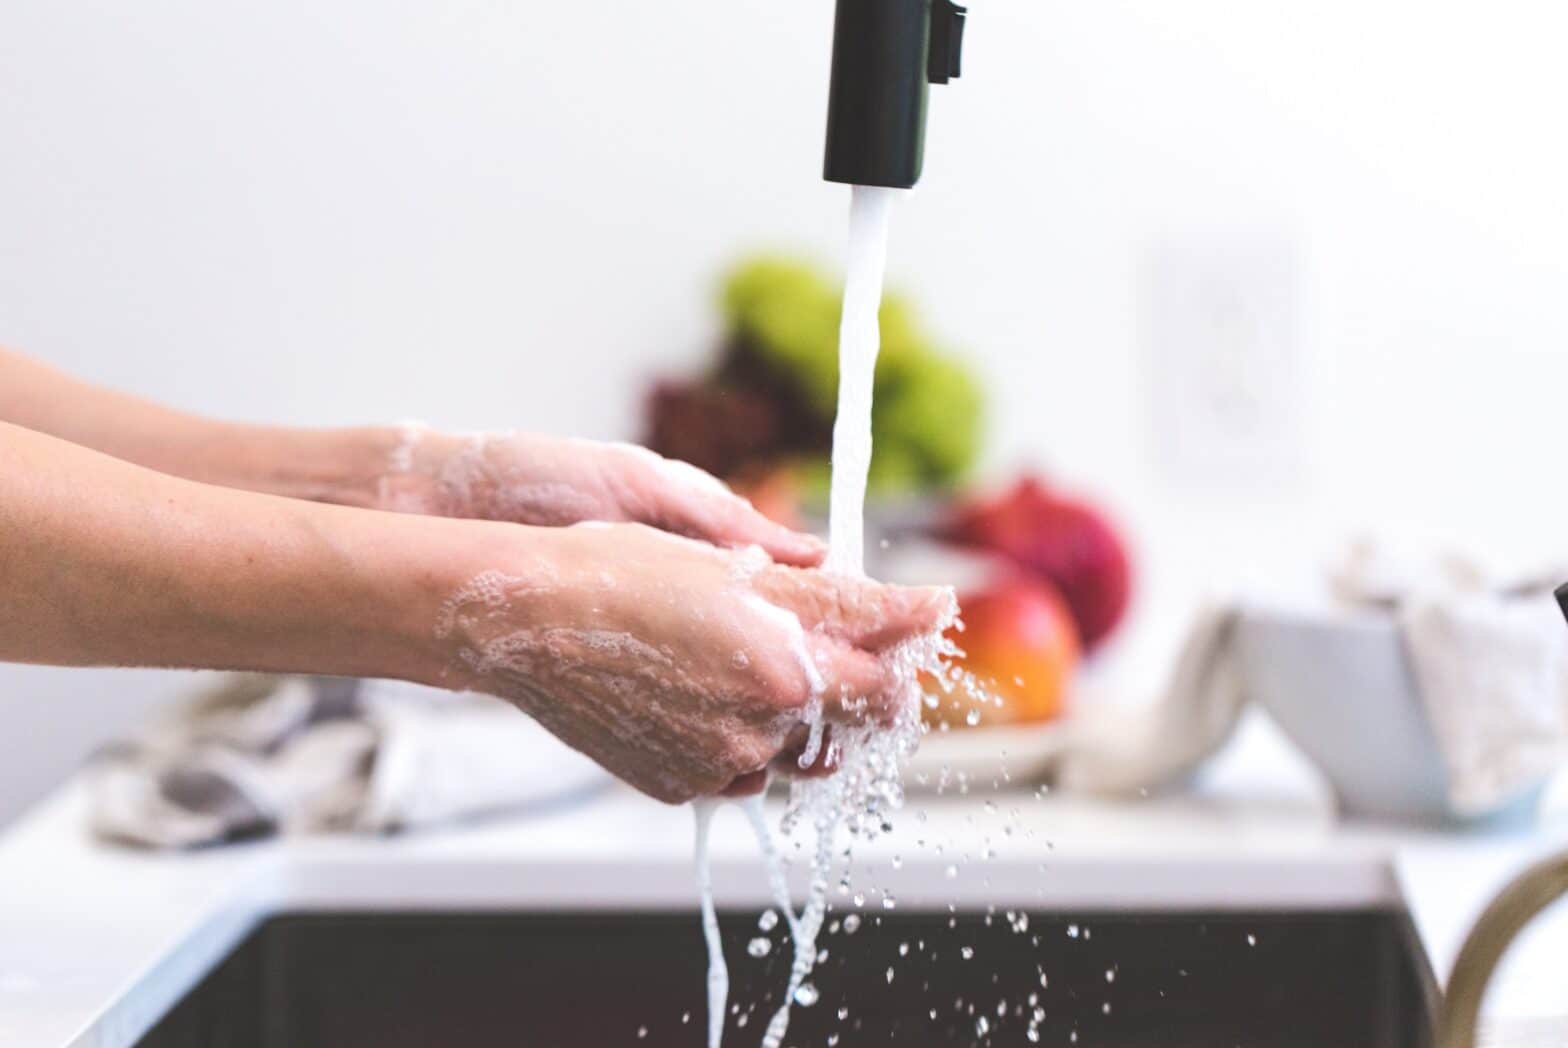 World Hand hygiene day: why it is still important